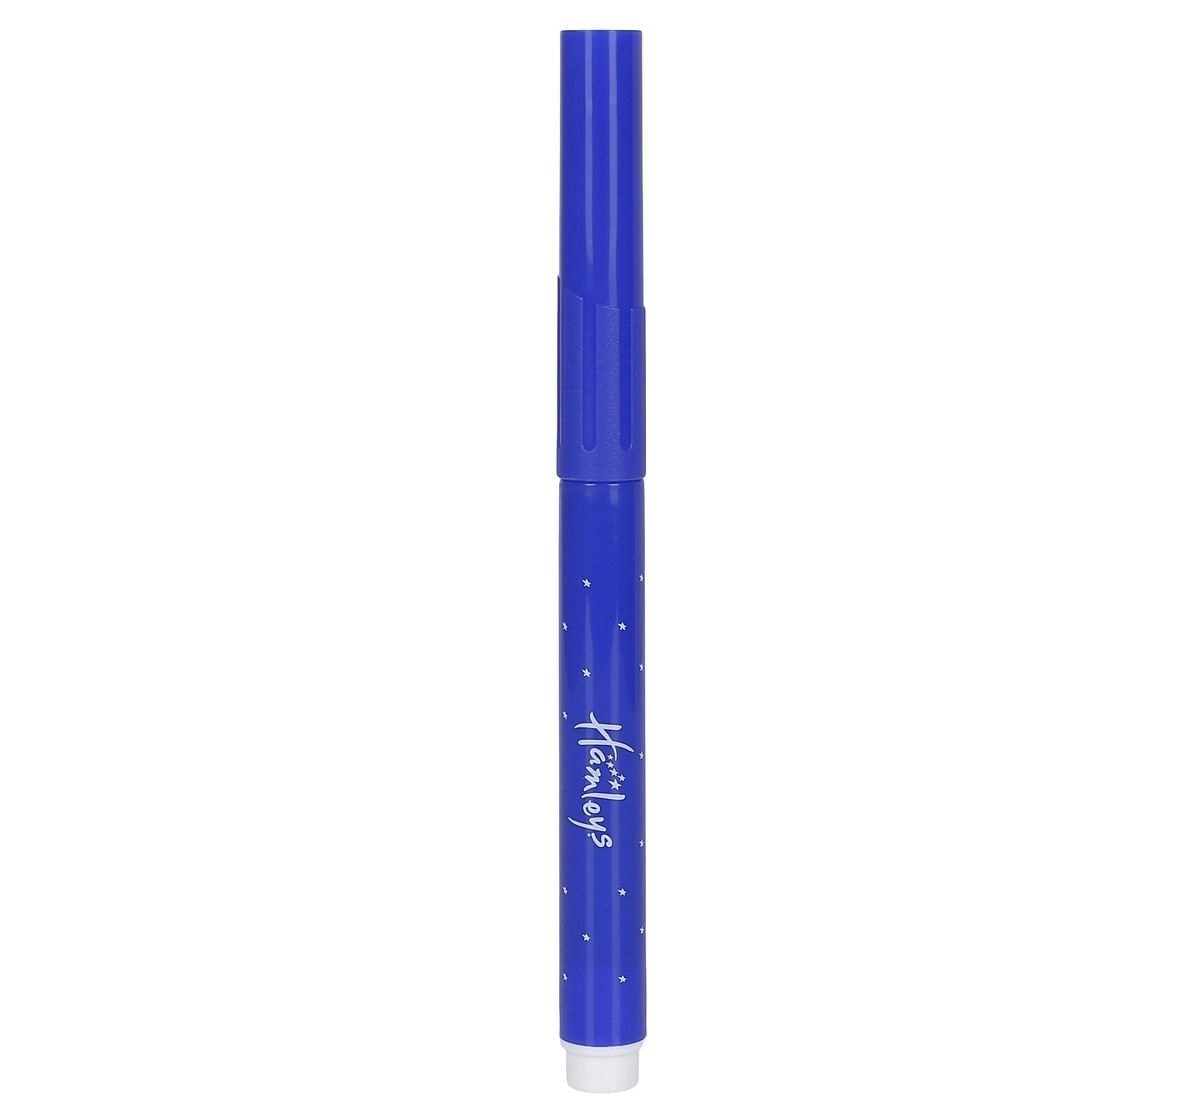 Hamleys Magic Pen Review  Money Worth Product For All Your